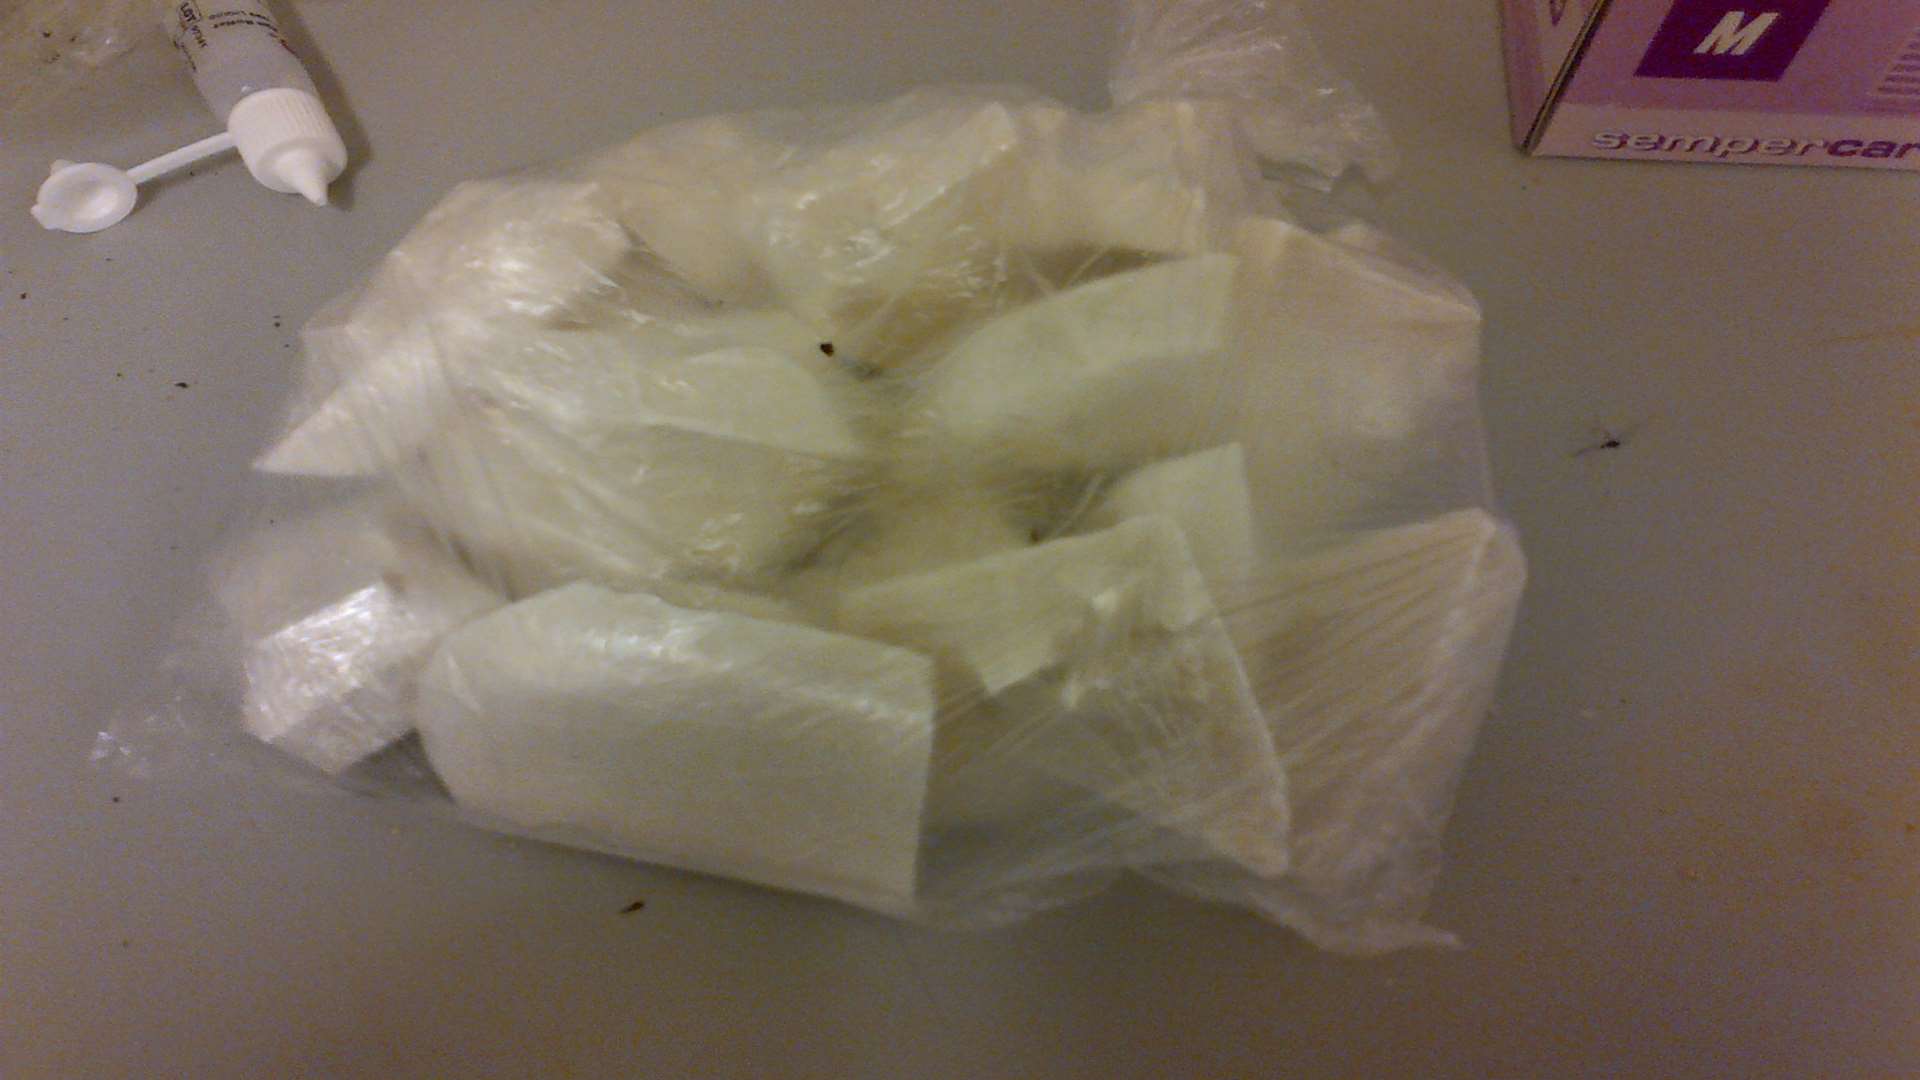 Drugs found by police during the operation